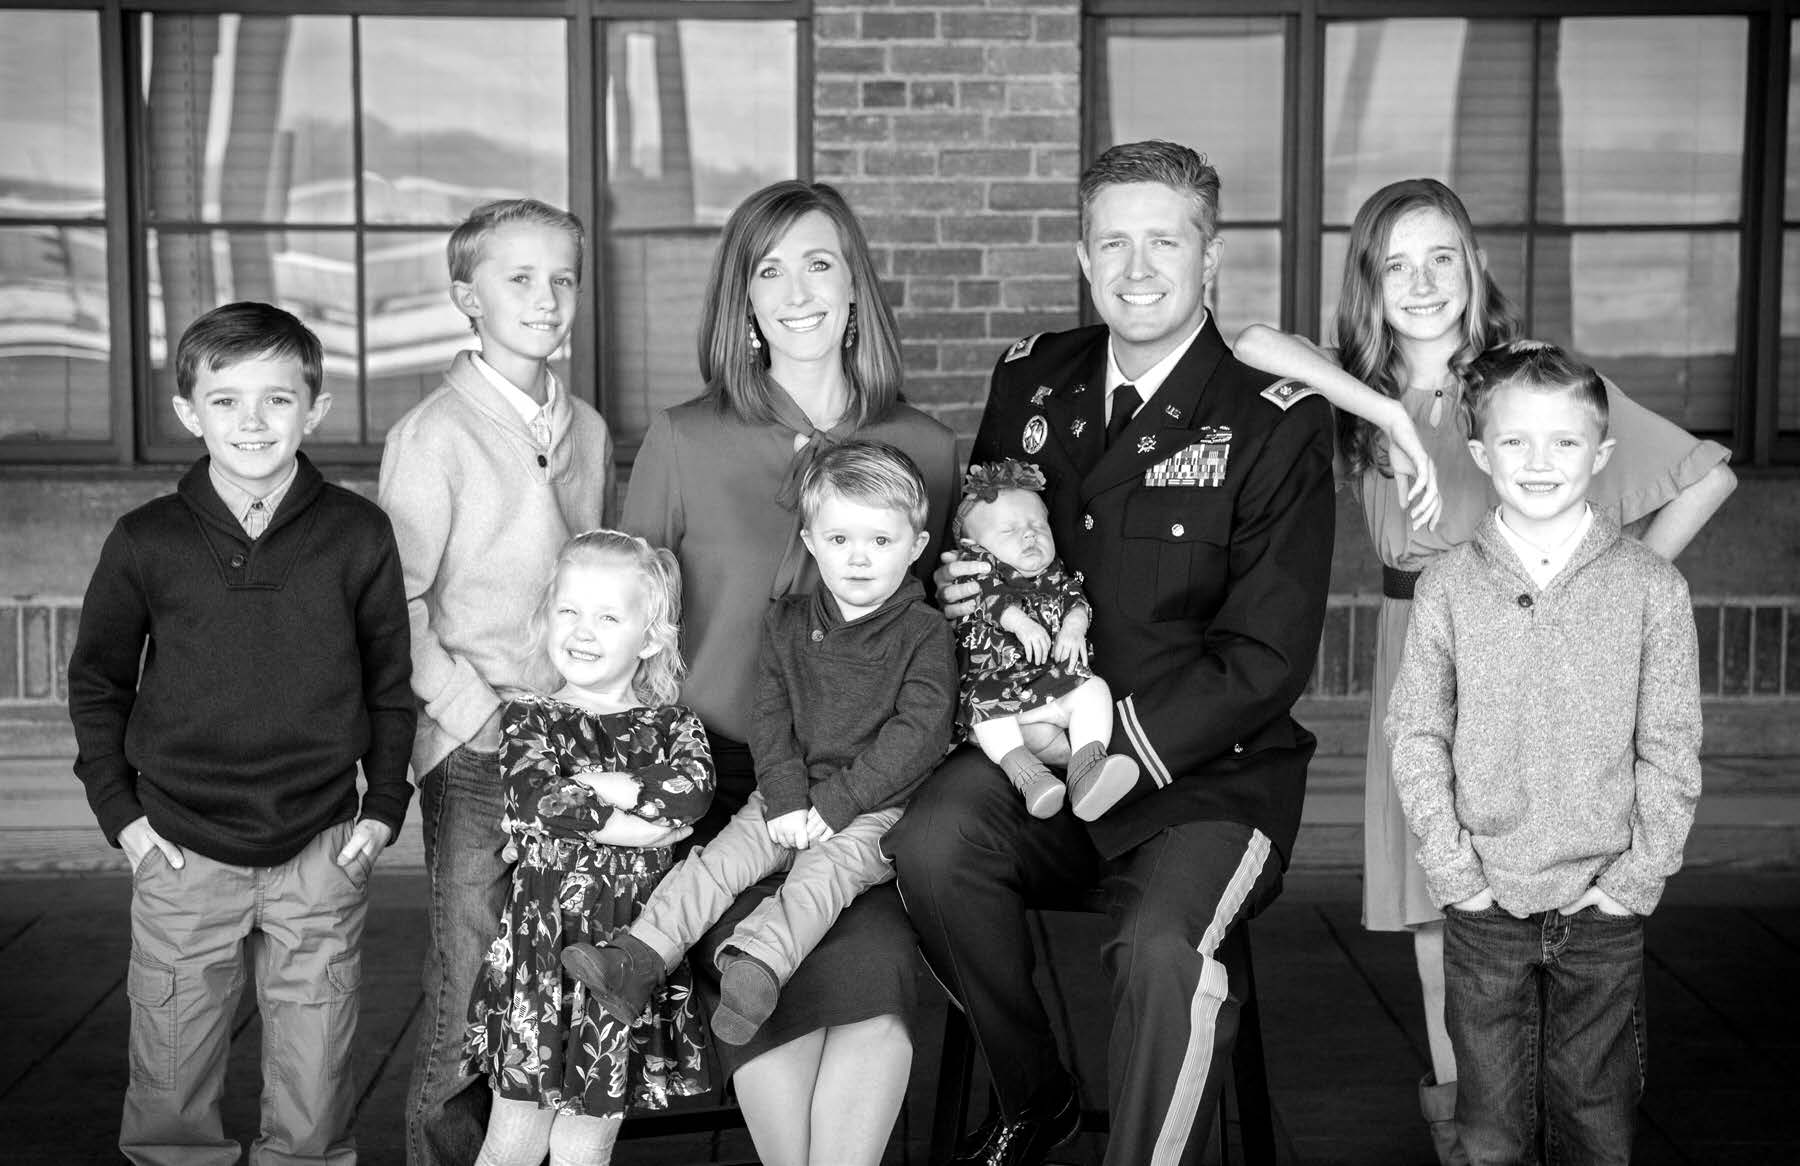 The family of Brent and Jennie Taylor, December 2017. Courtesy of Westbroek Studios.